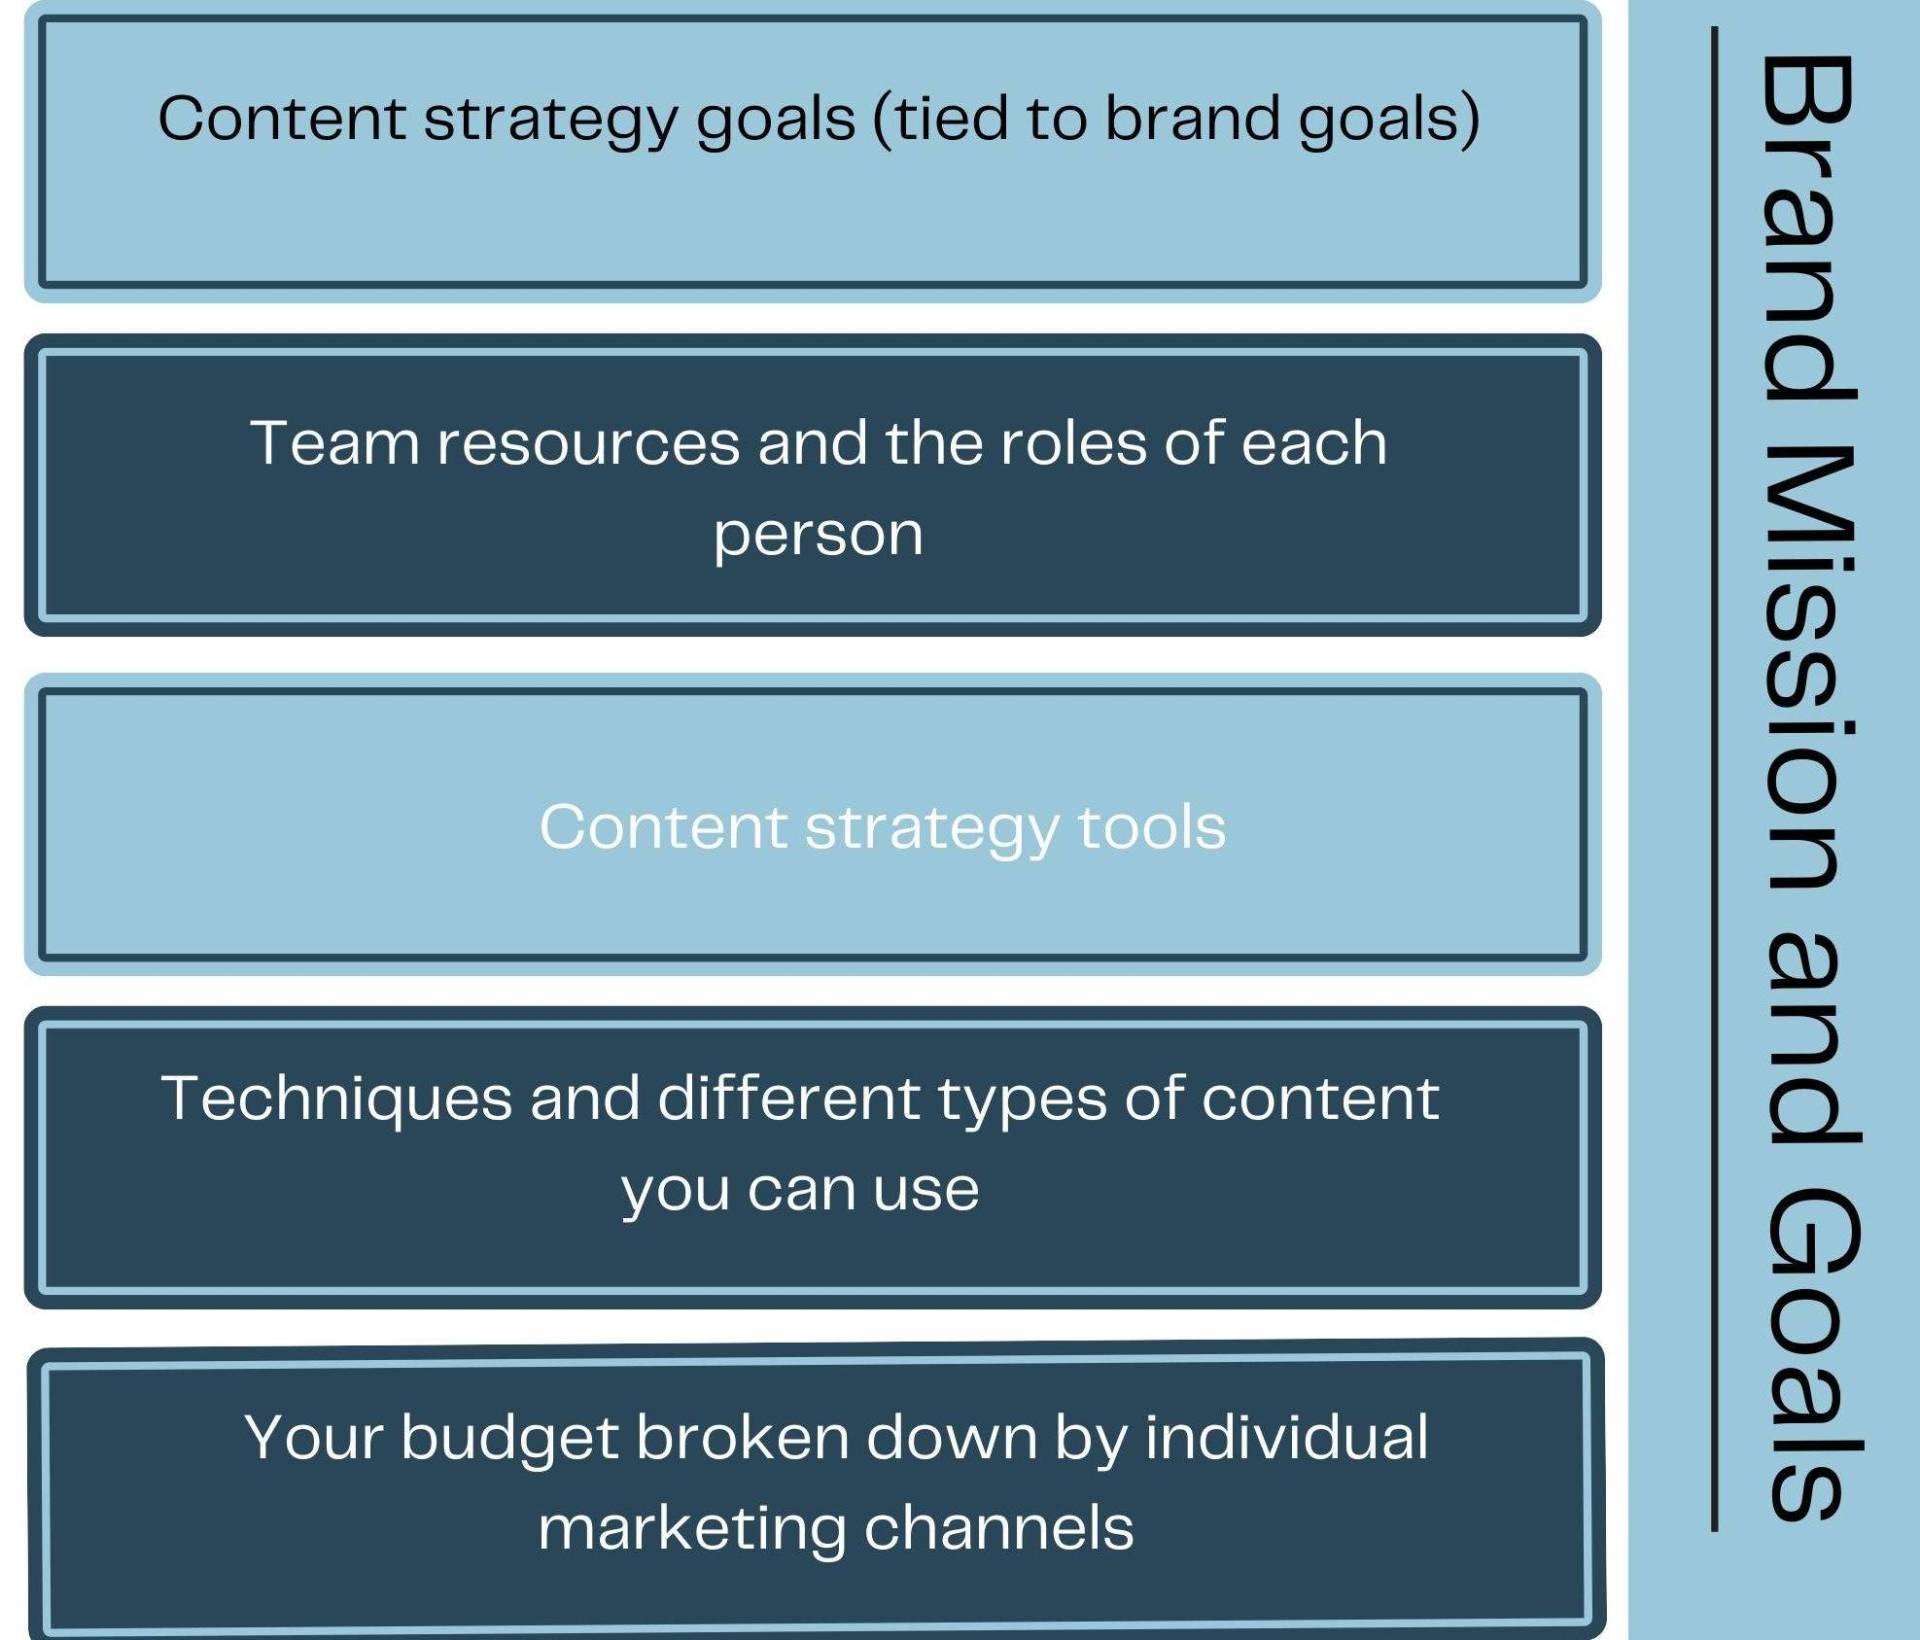 Brand missions and goals one must have in place to create a content strategy framework